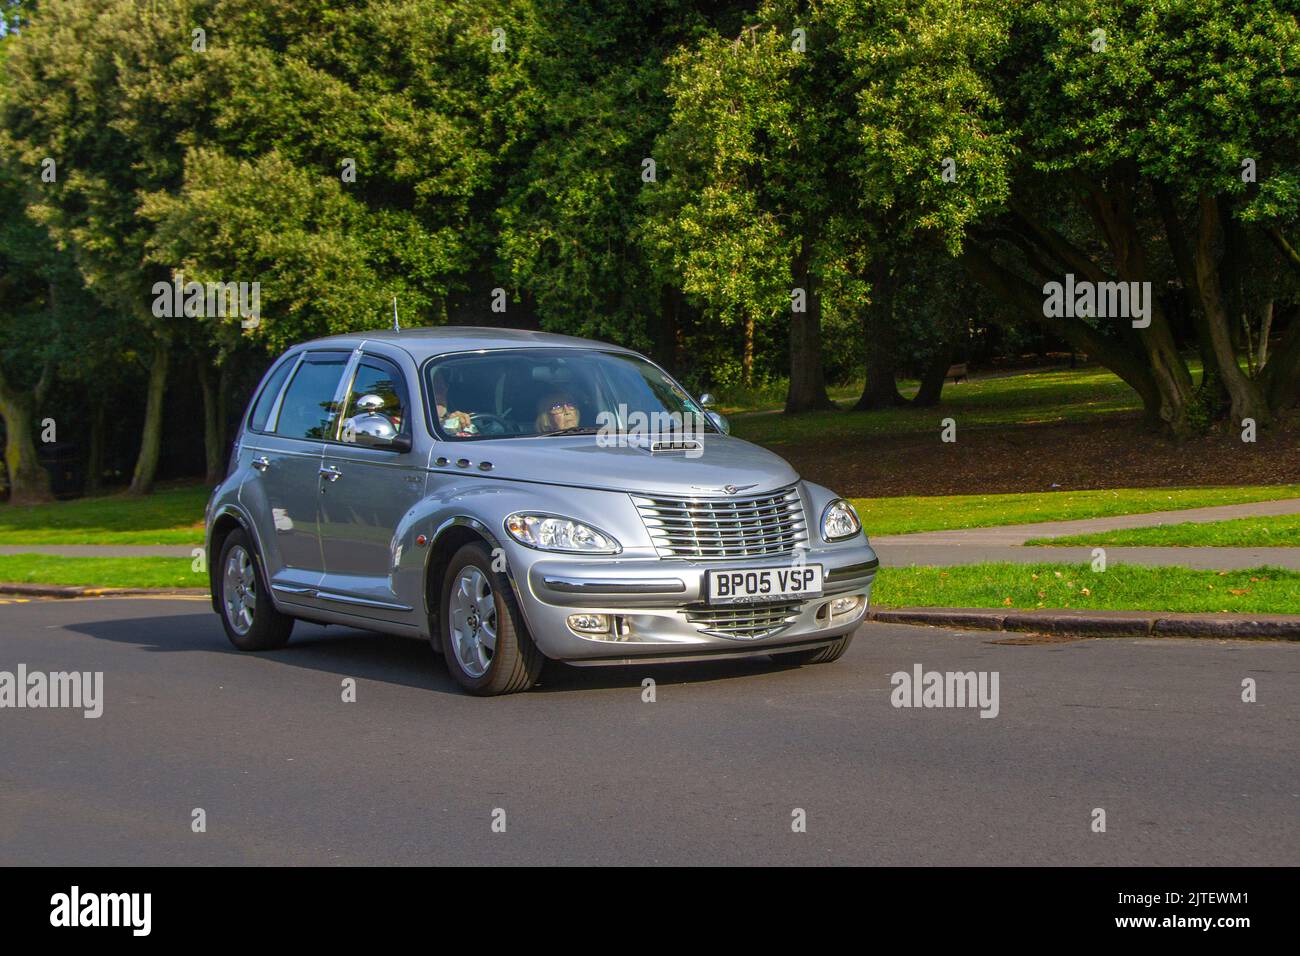 2005 Silver CHRYSLER PT CRUISER TOURING CRD Classic, 2148cc 5-speed manual; Cars arriving at the annual Stanley Park Classic Car Show. Stanley Park classics yesteryear Motor Show is hosted by Blackpool Vintage Vehicle Preservation Group, UK. Stock Photo